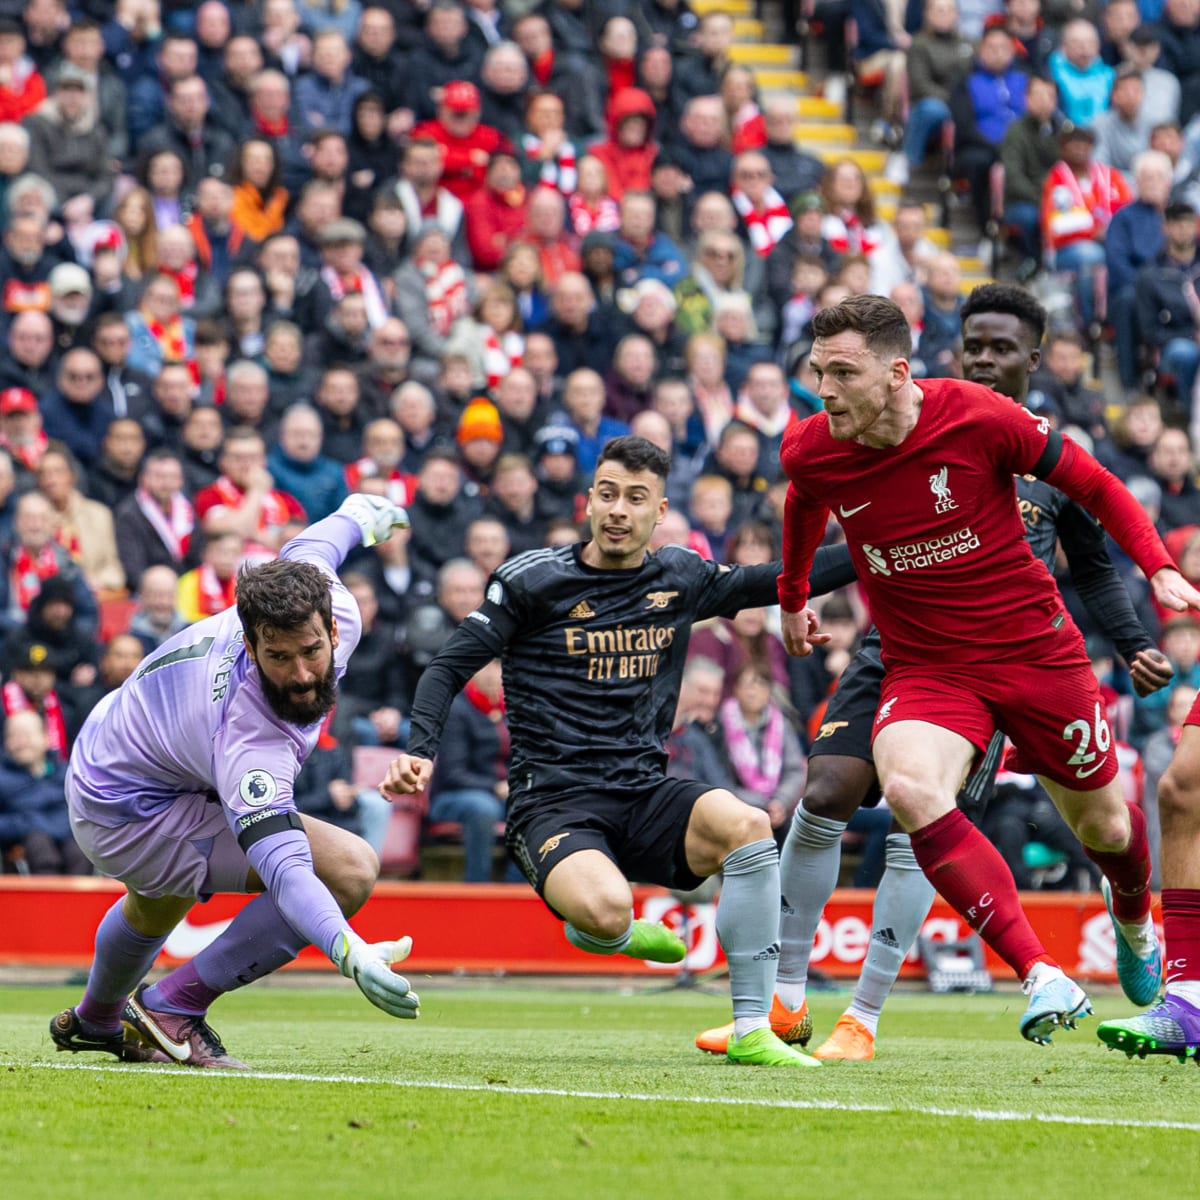 Watch Gabriel Martinelli goal for Arsenal vs Liverpool at Anfield